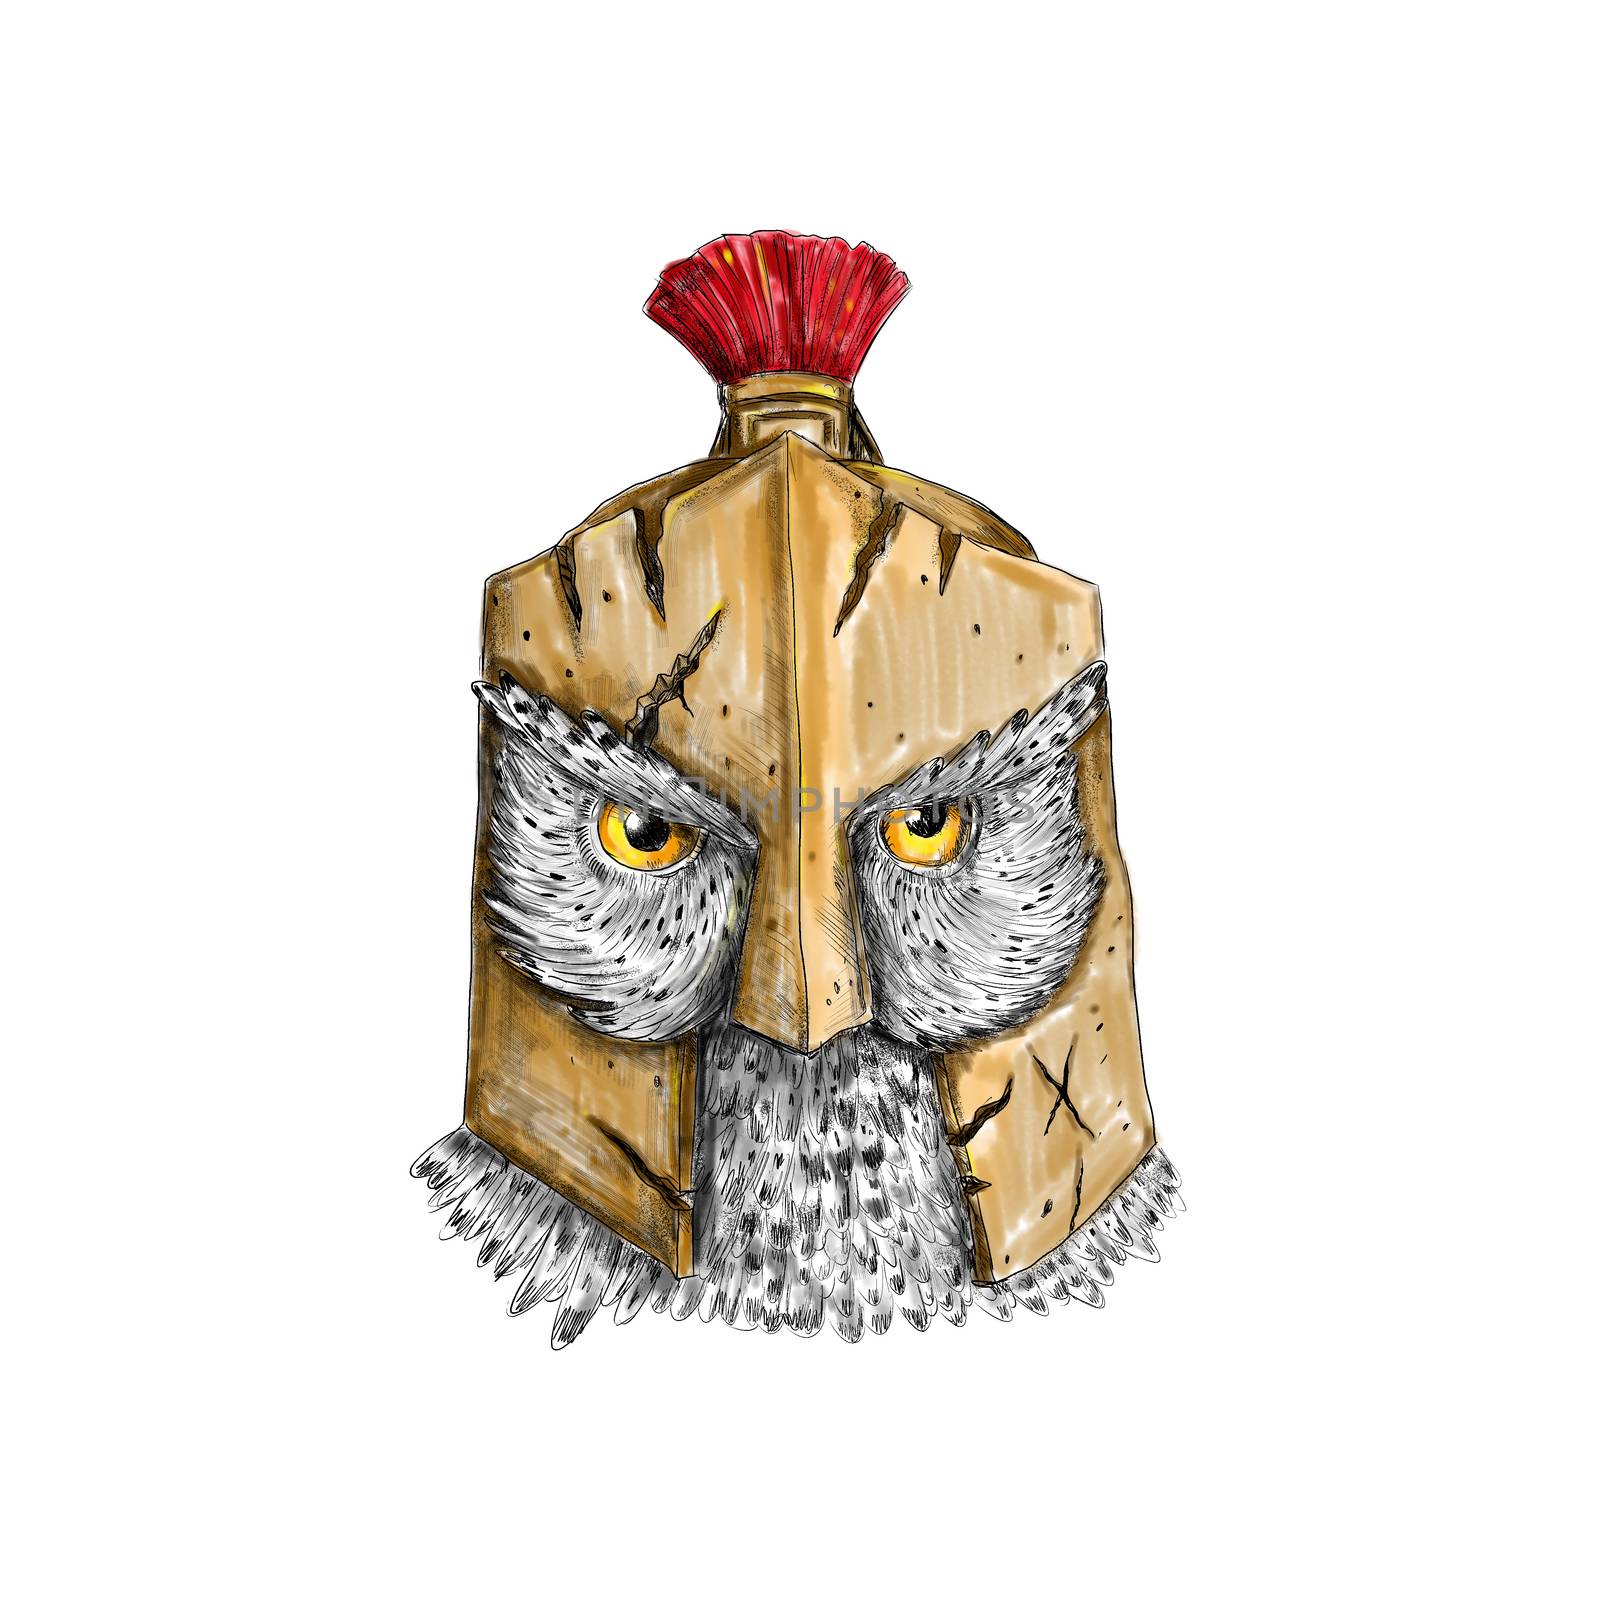 Tattoo style illustration of an owl wearing a spartan helmet viewed from front.